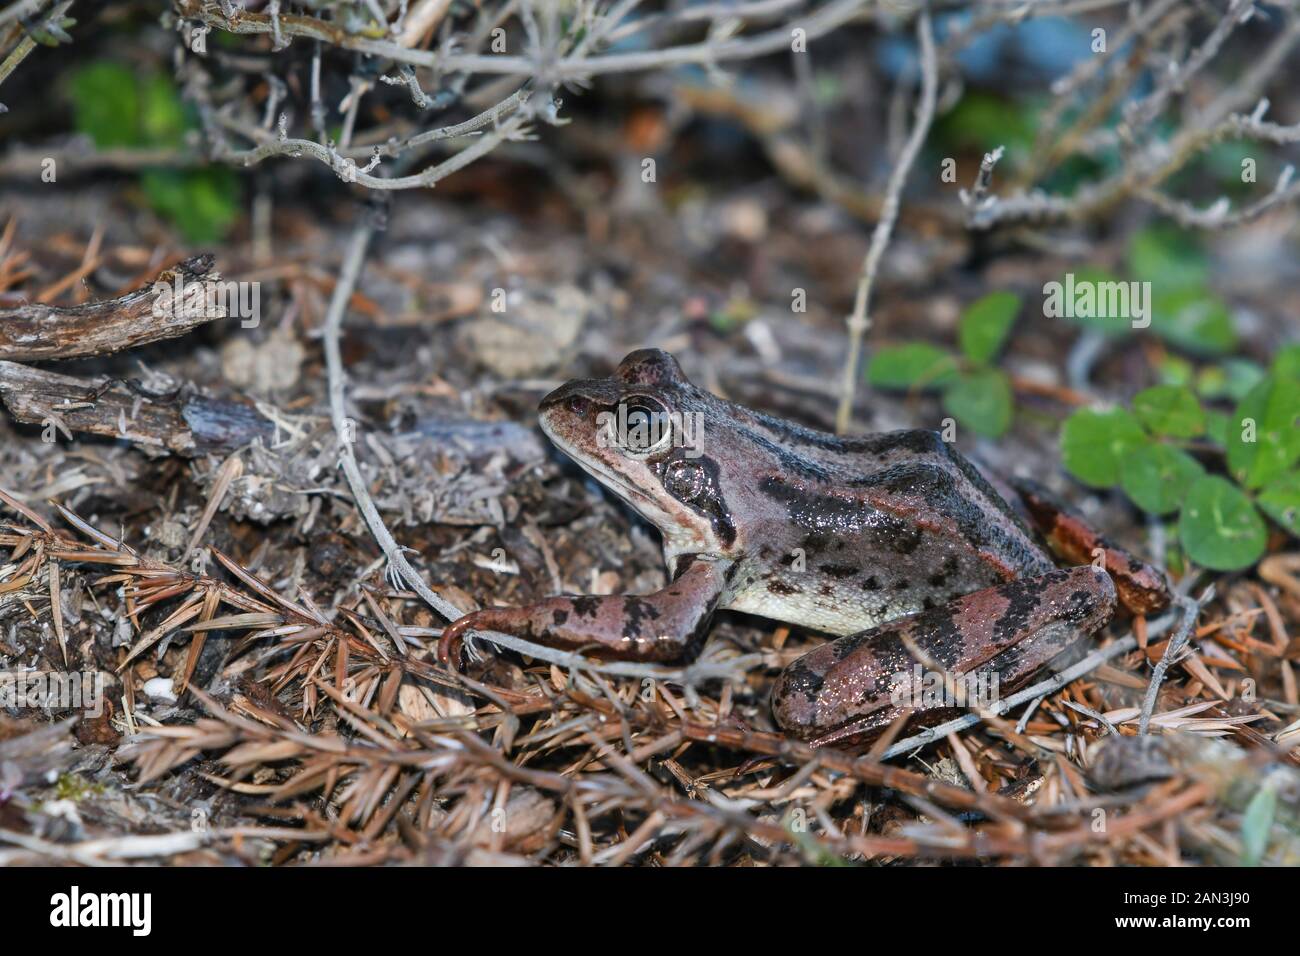 Close-up of common frog Stock Photo